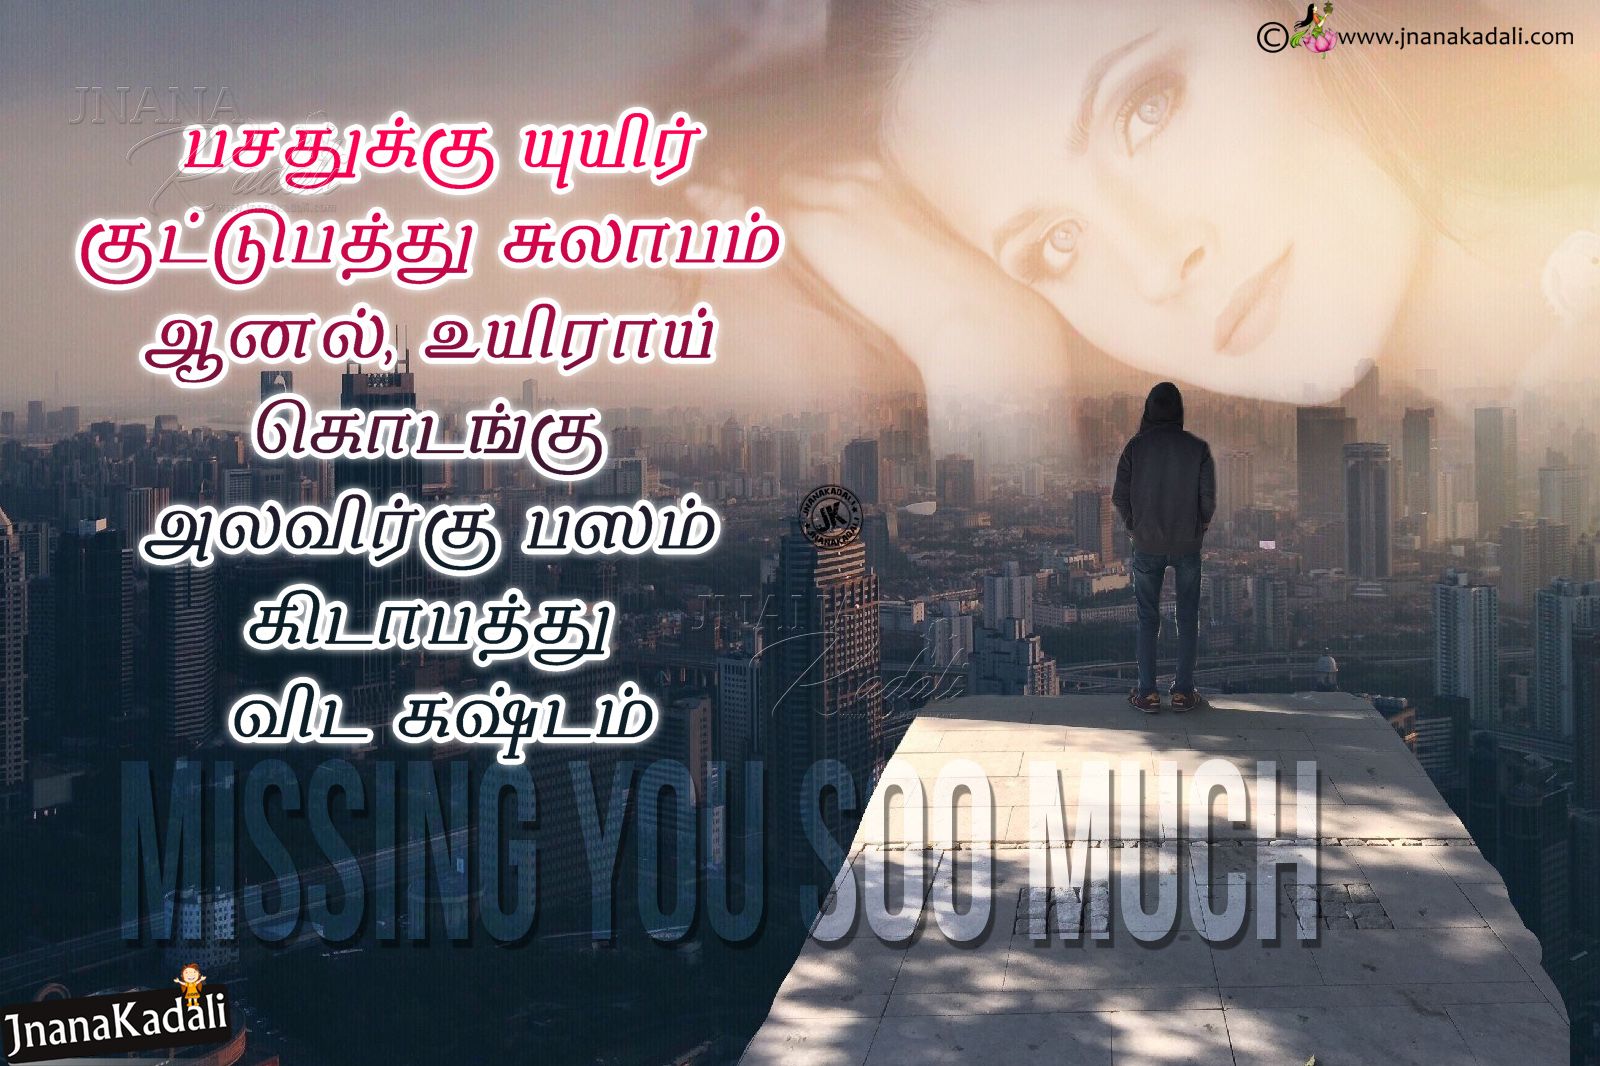 Heart Touching Romantic Love quotes Messages in Tamil with couple